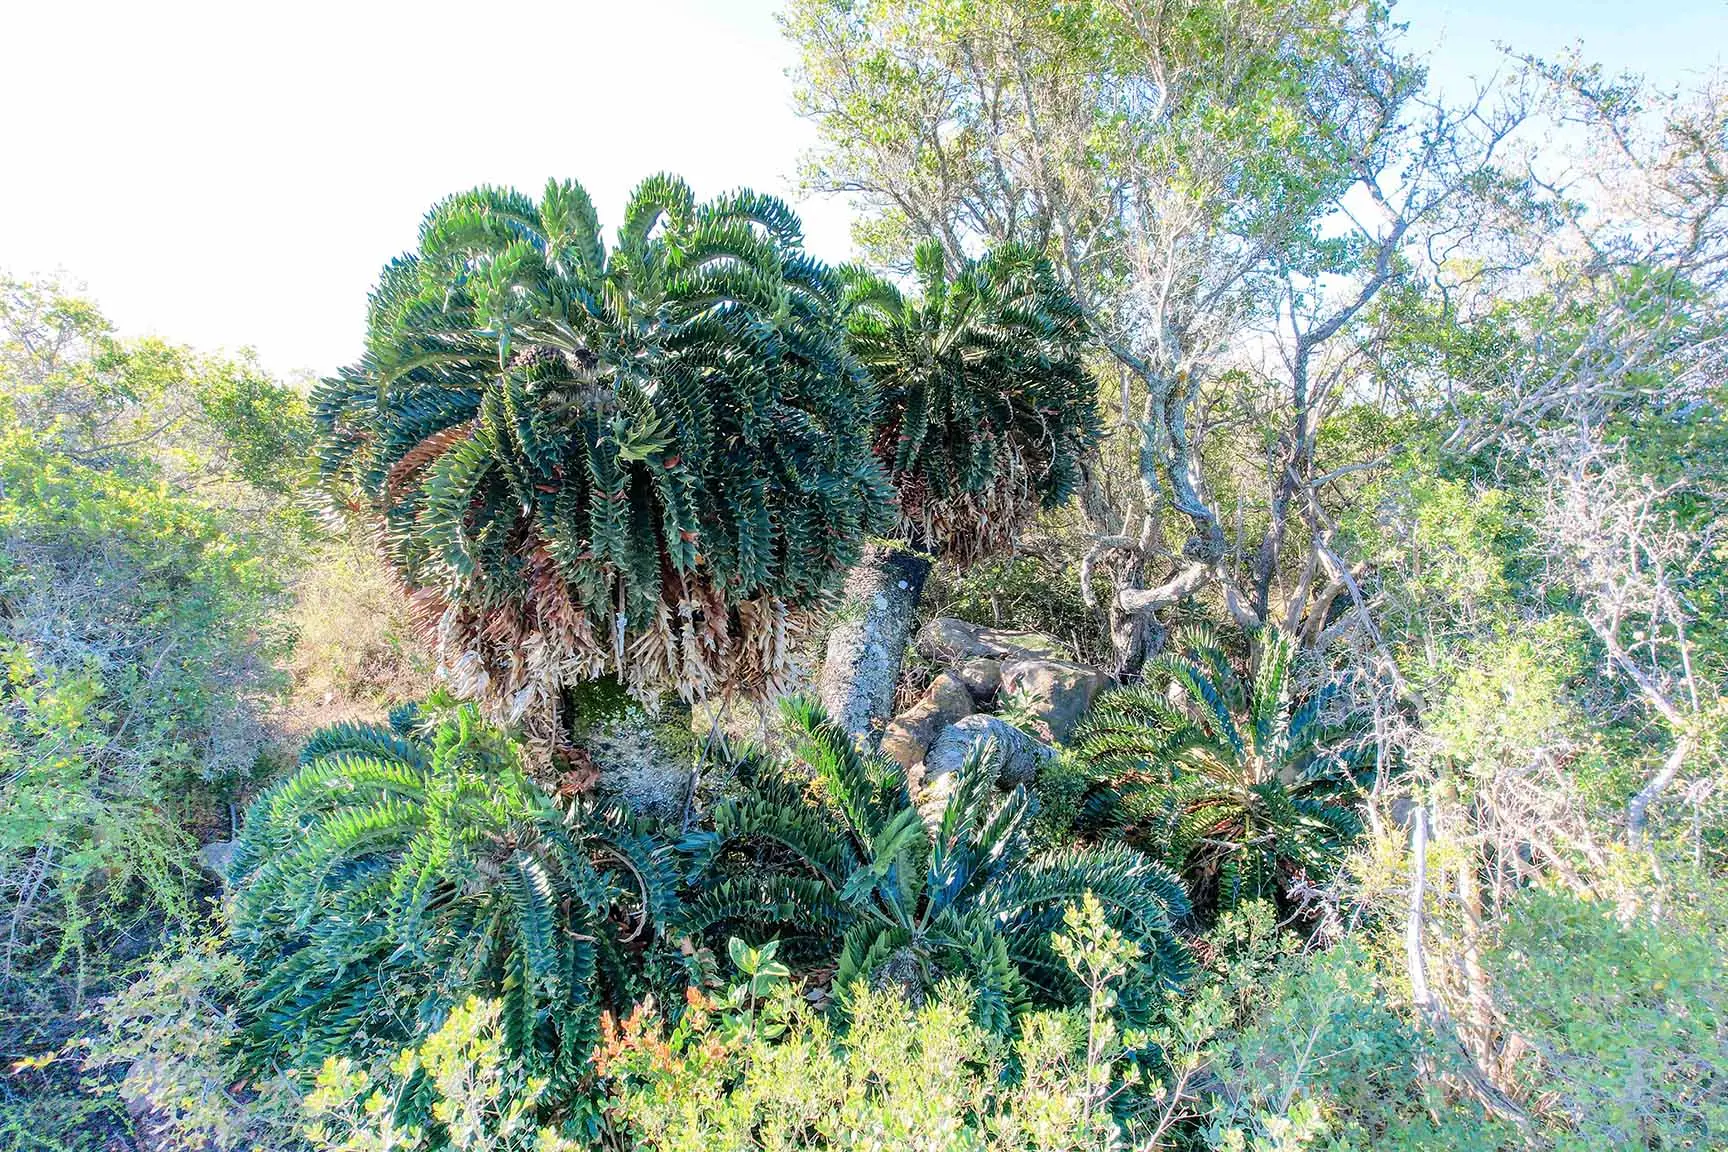 Large old plant of Critically Endangered Encephalartos latifrons, one of the species assessed for the Green List